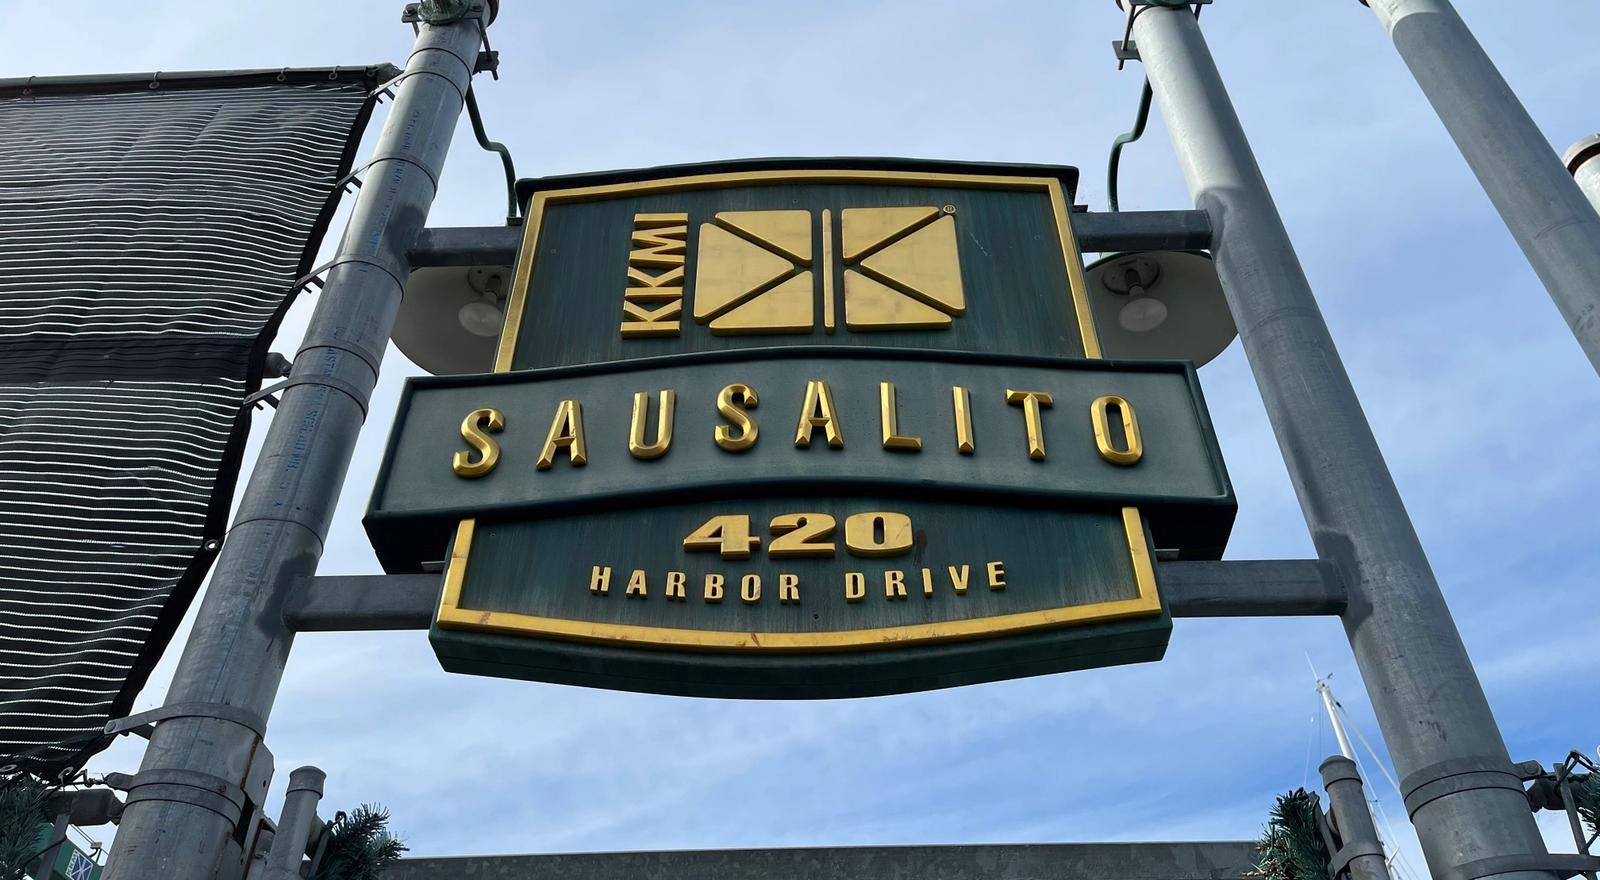 Large sign that says Sausolito 420 Harbour drive